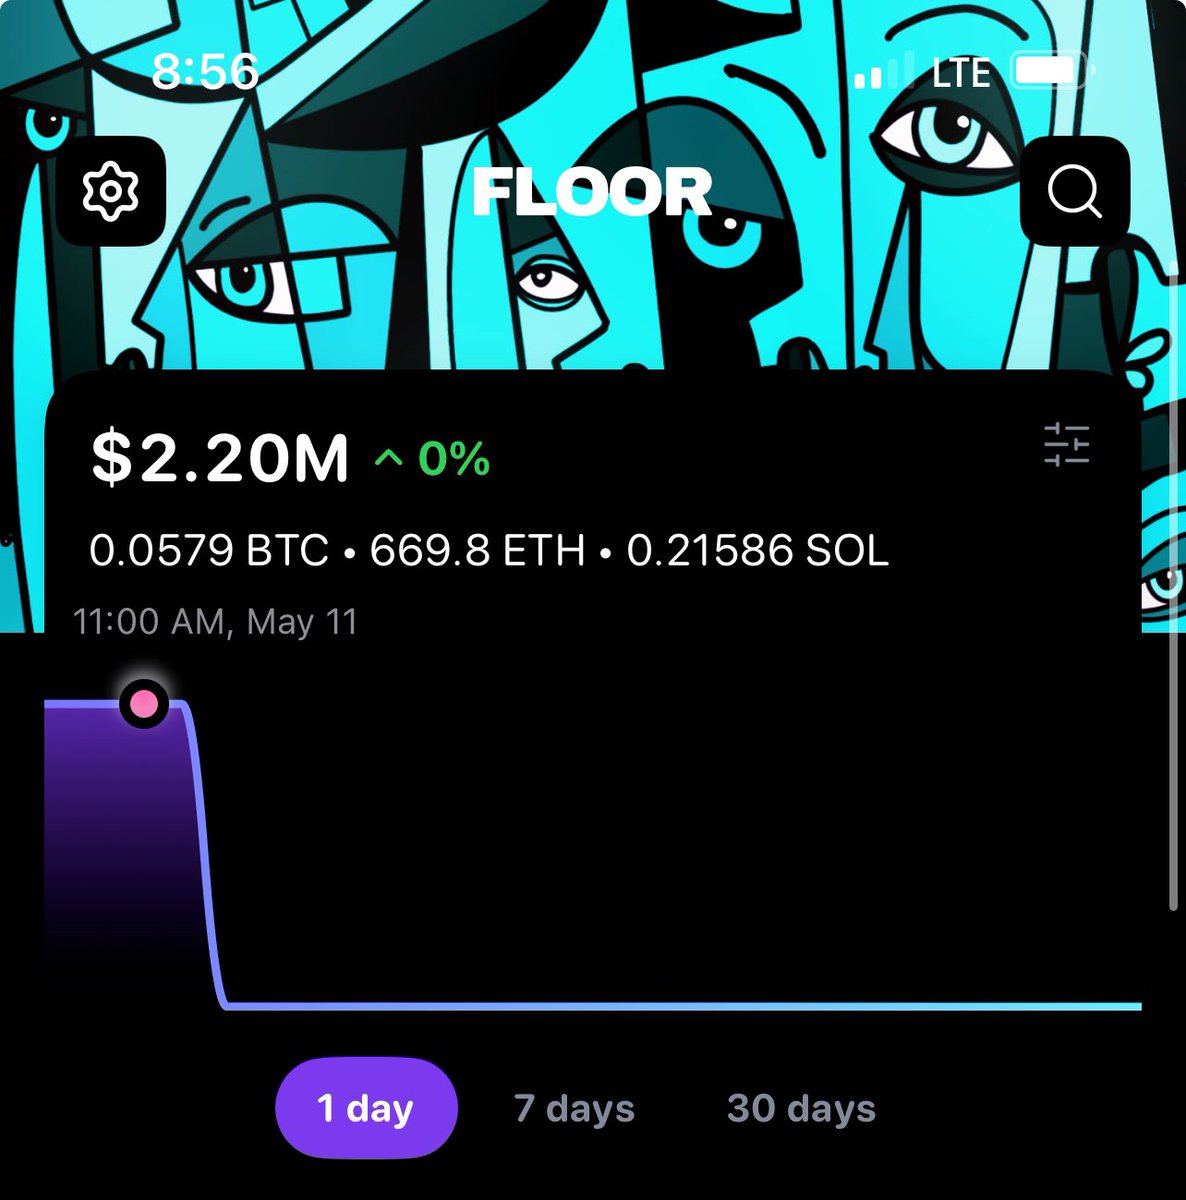 When the @floor app shows me a “FUTURE” state💜💜💜💜💜
*we are earlyAF Friends.  **Time in the market trumps timing of the market.
Leadwithlove.eth #GRAMPS 🫂🫂🫡